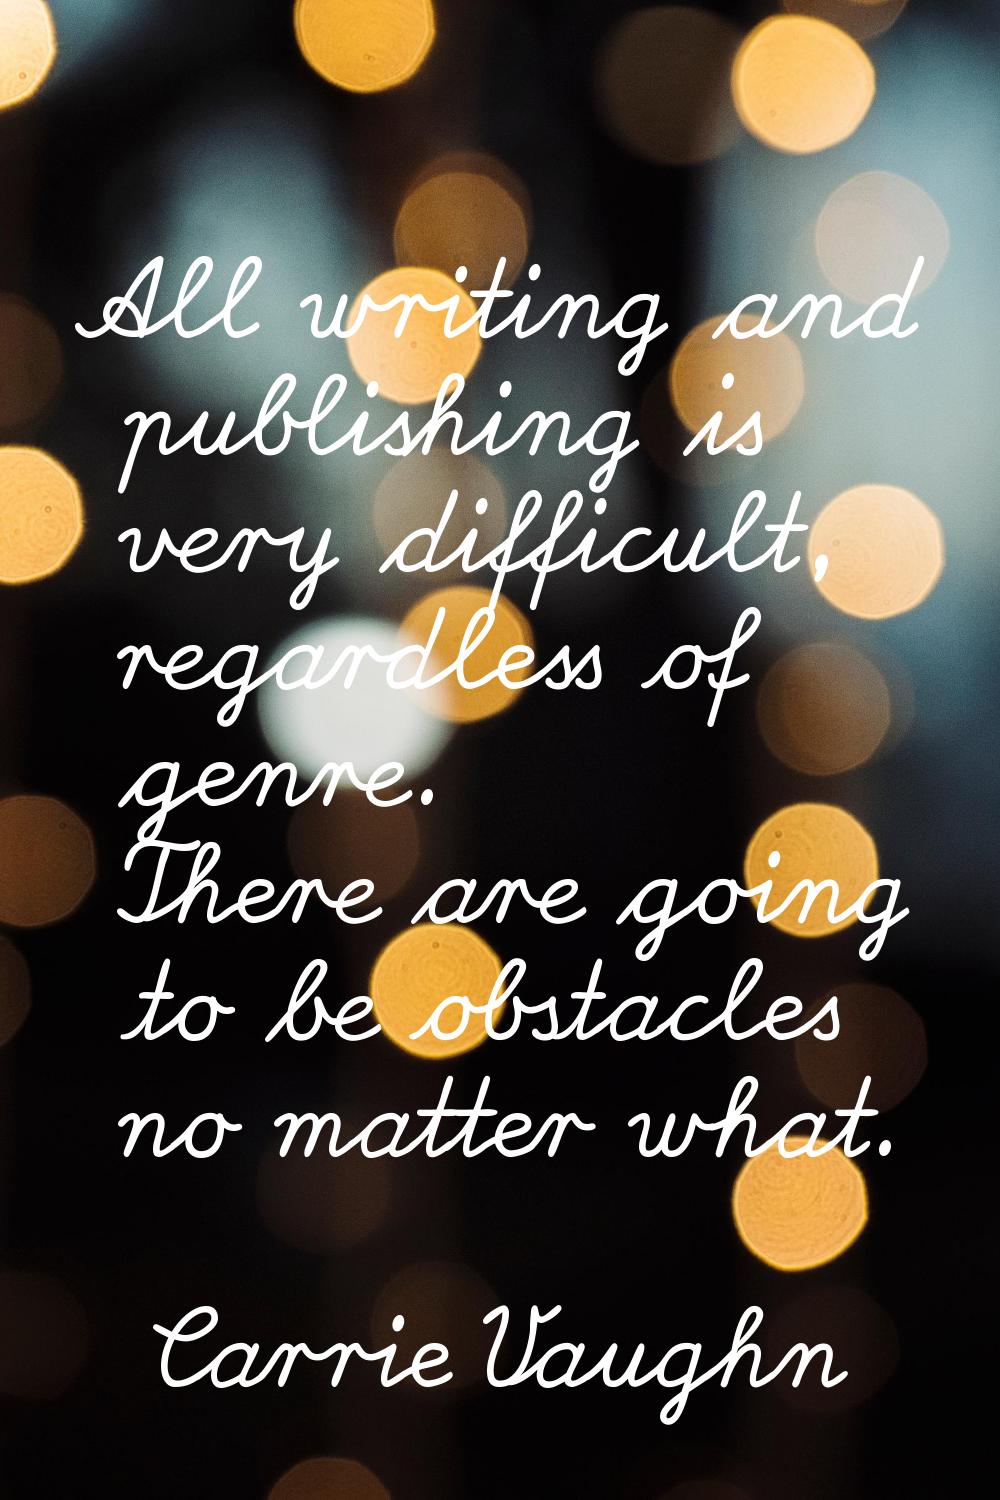 All writing and publishing is very difficult, regardless of genre. There are going to be obstacles 